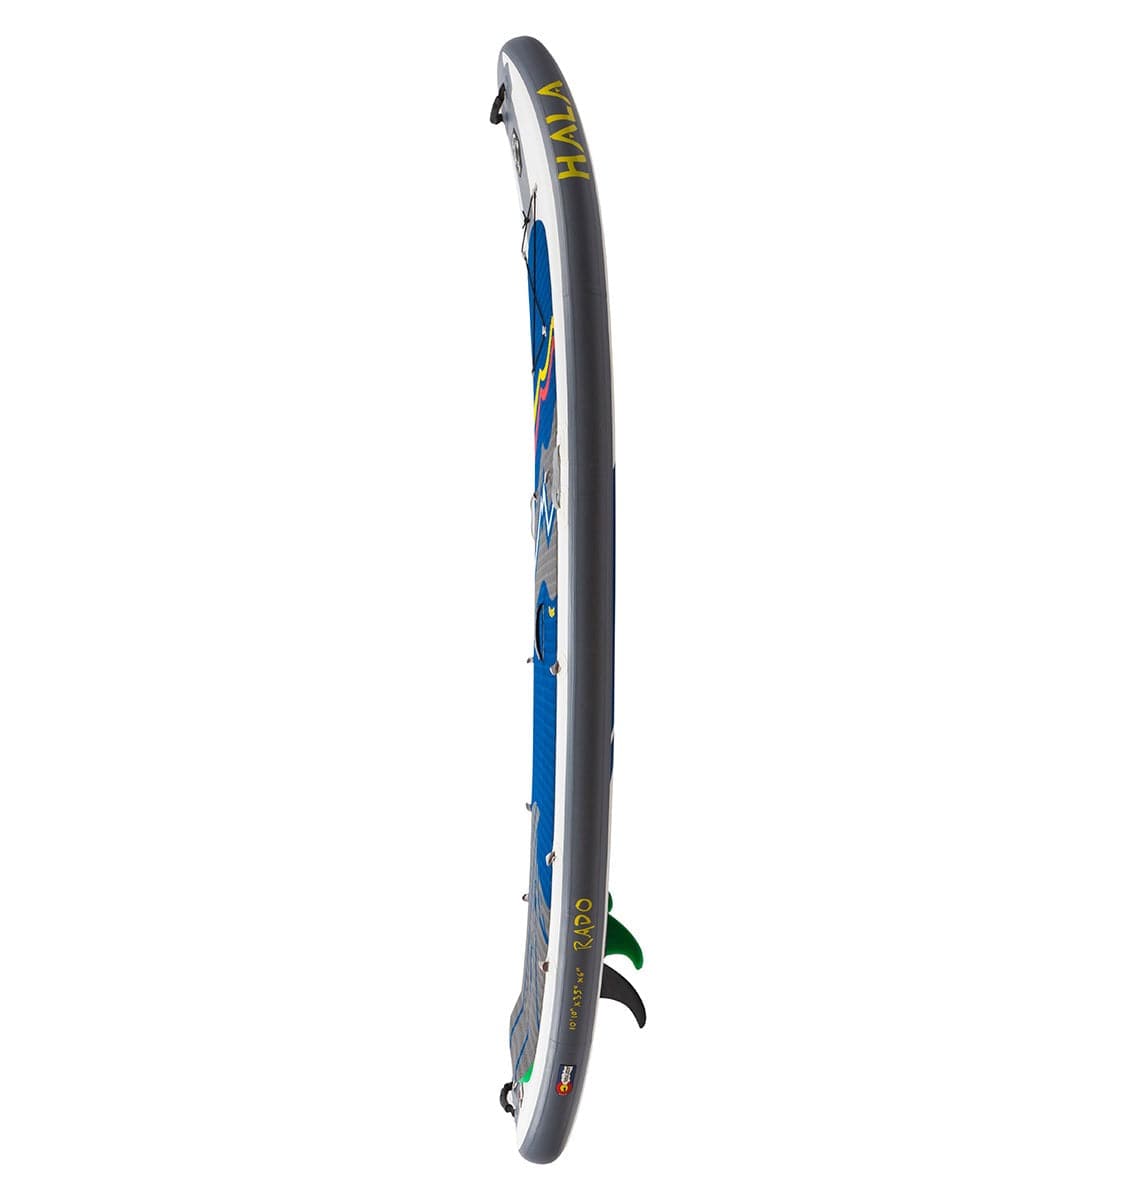 Featuring the Rado 10'10 Inflatable SUP inflatable sup, whitewater sup manufactured by Hala shown here from a third angle.